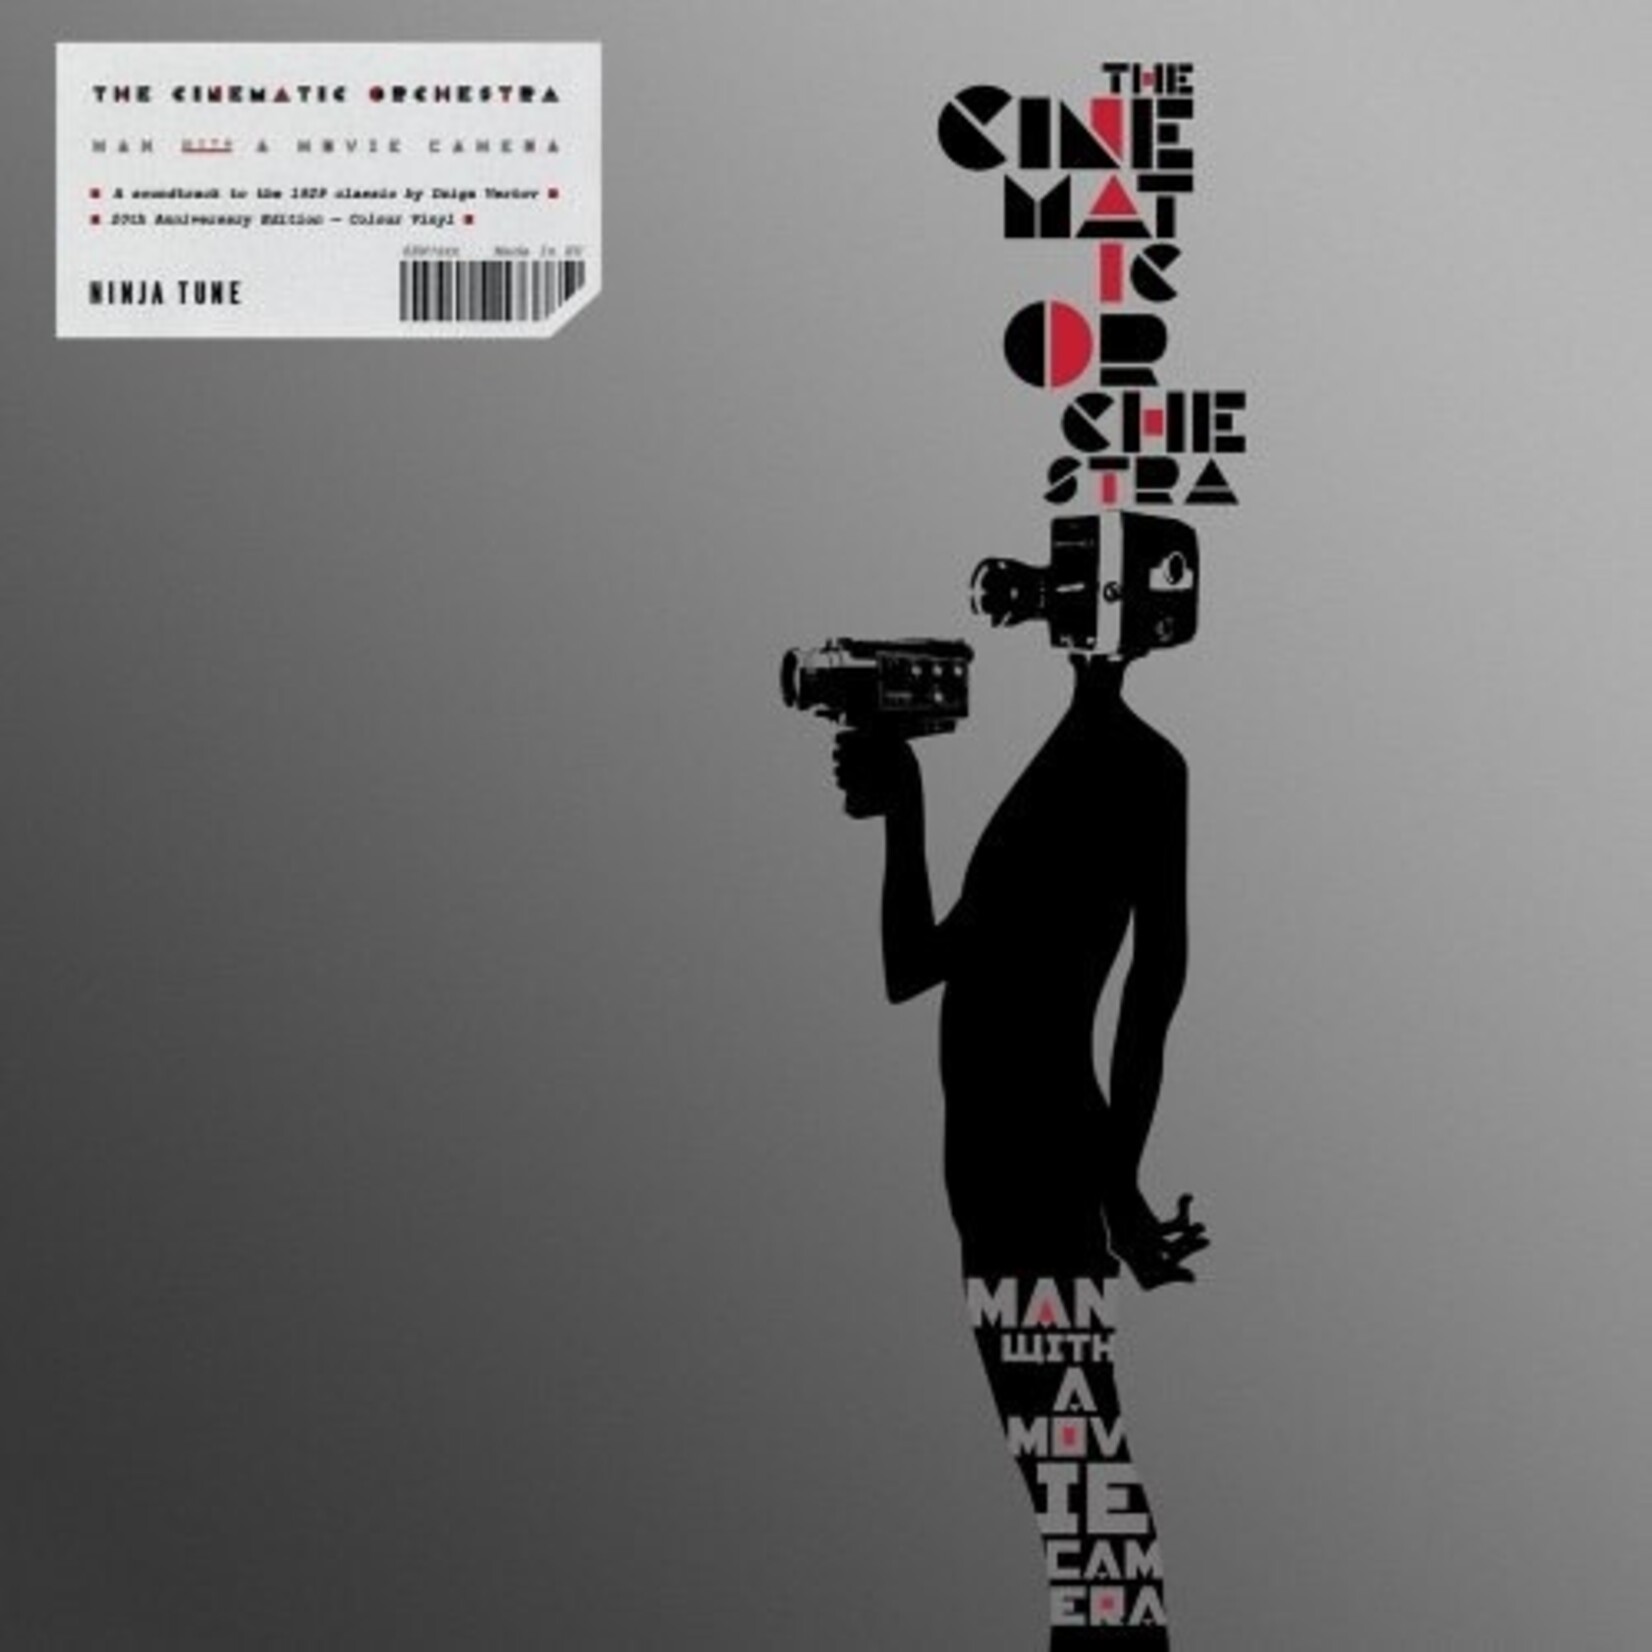 [New] The Cinematic Orchestra - Man With A Movie Camera (2LP) 20th Anniversary Edition, ashen & pewter grey vinyl)